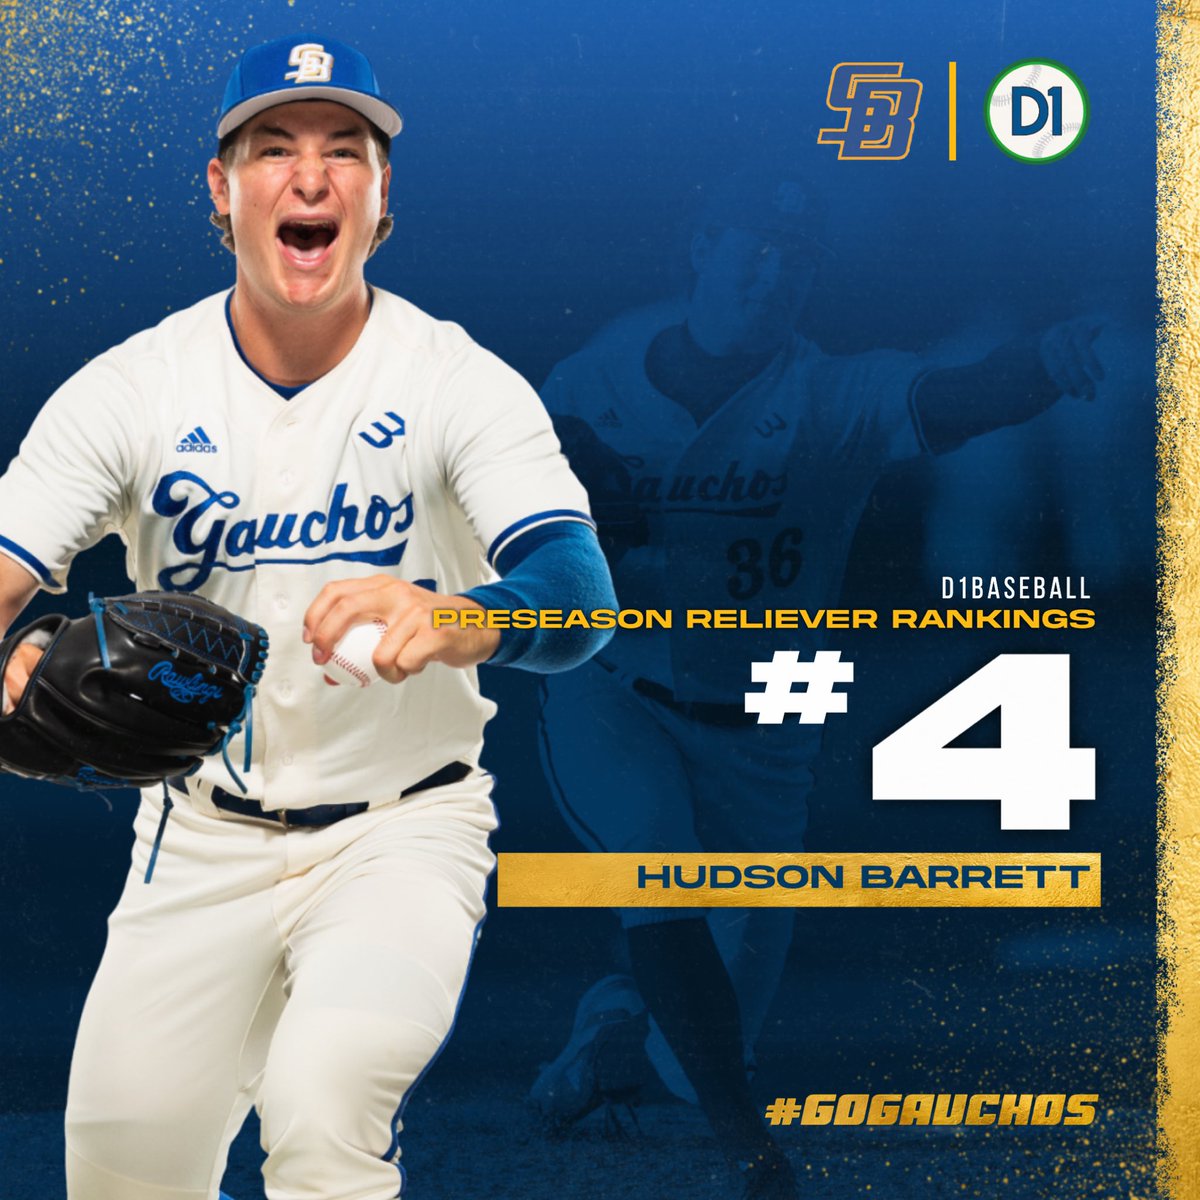 Hudson Barrett with yet another preseason award! He comes in at the #4 spot in D1 Baseball's Preseason Reliever Rankings! #GoChos